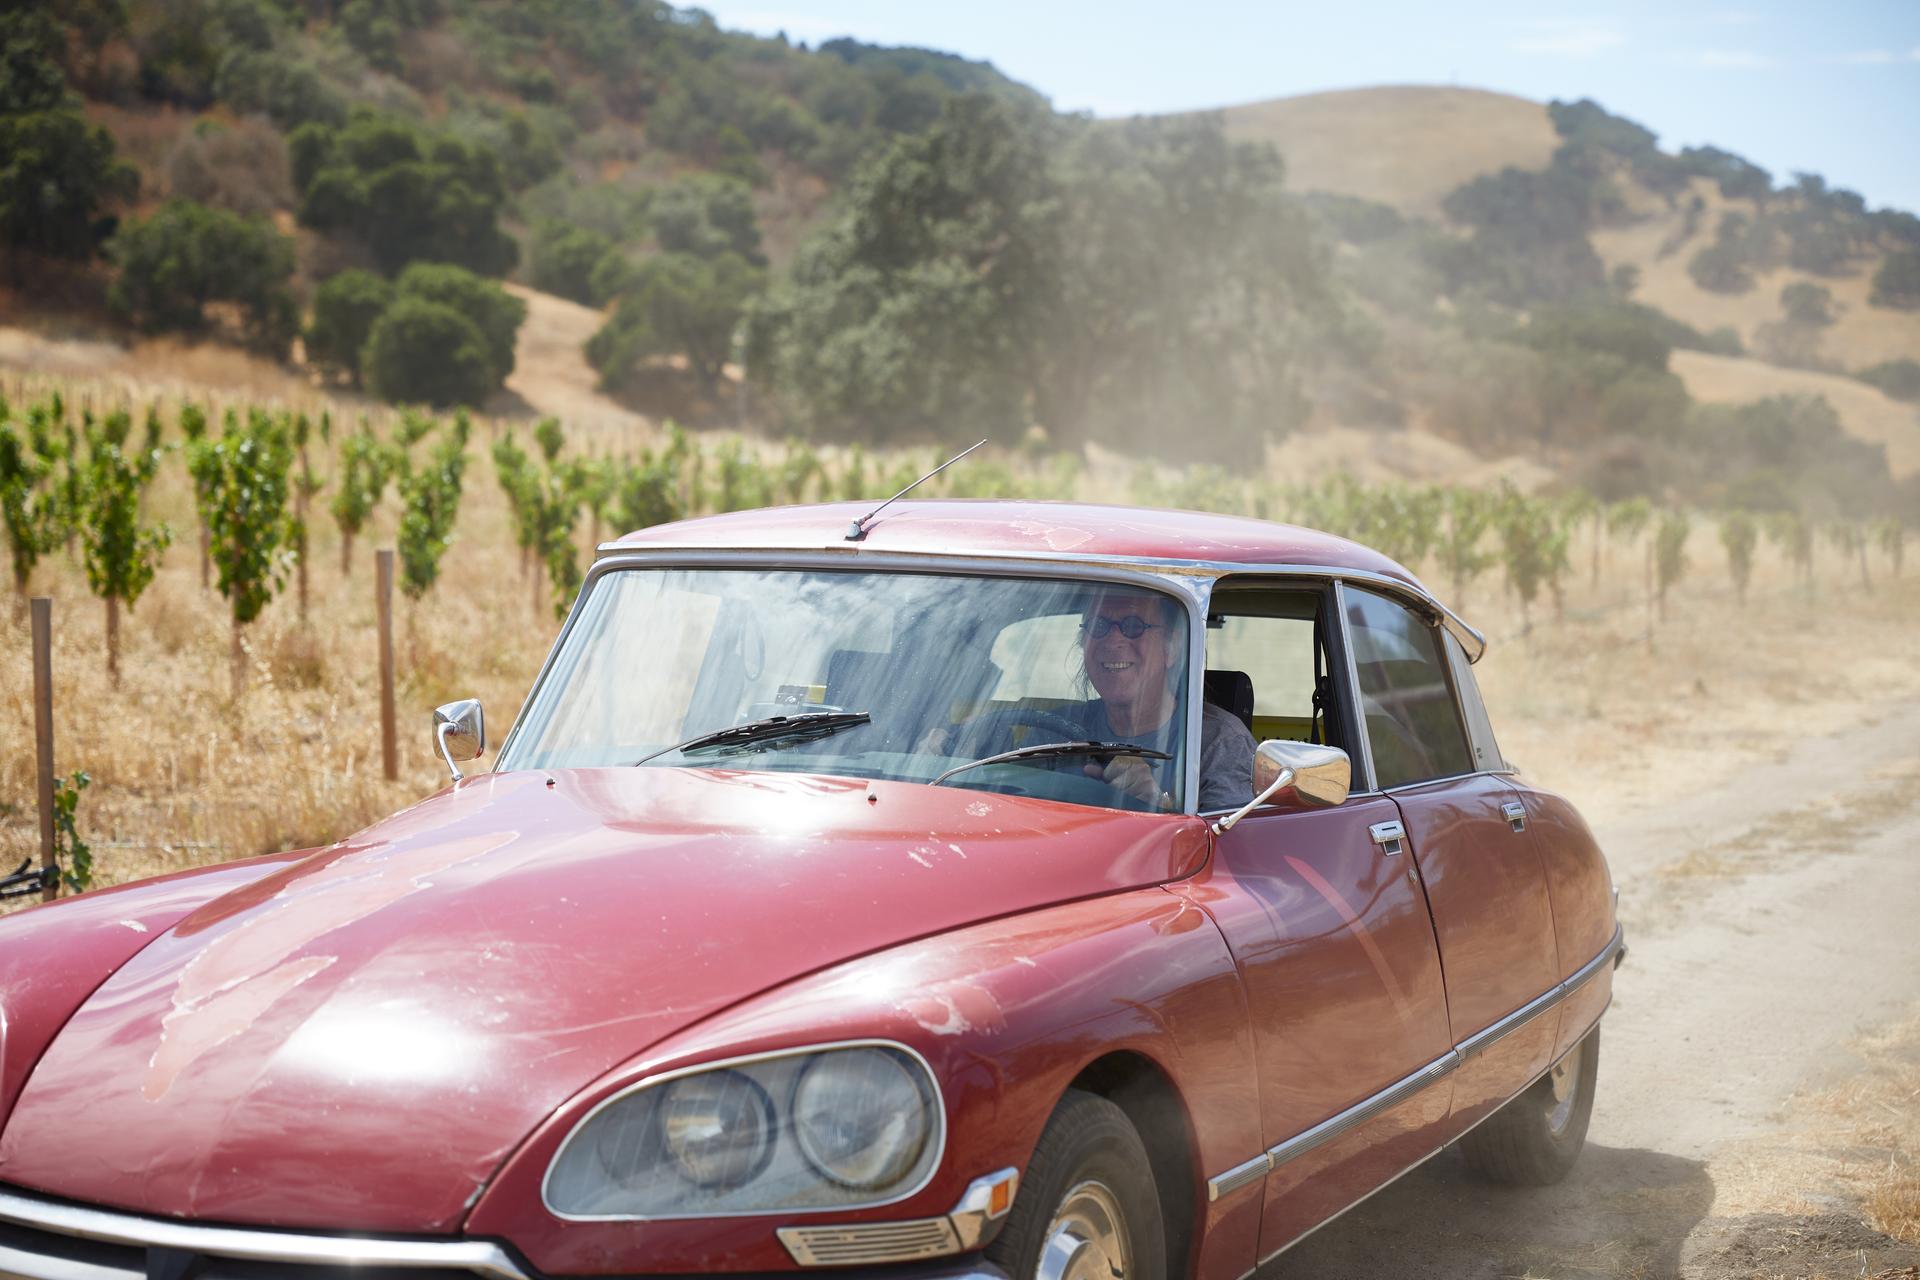 Winemaker Randall Grahm driving through a vineyard in a red car